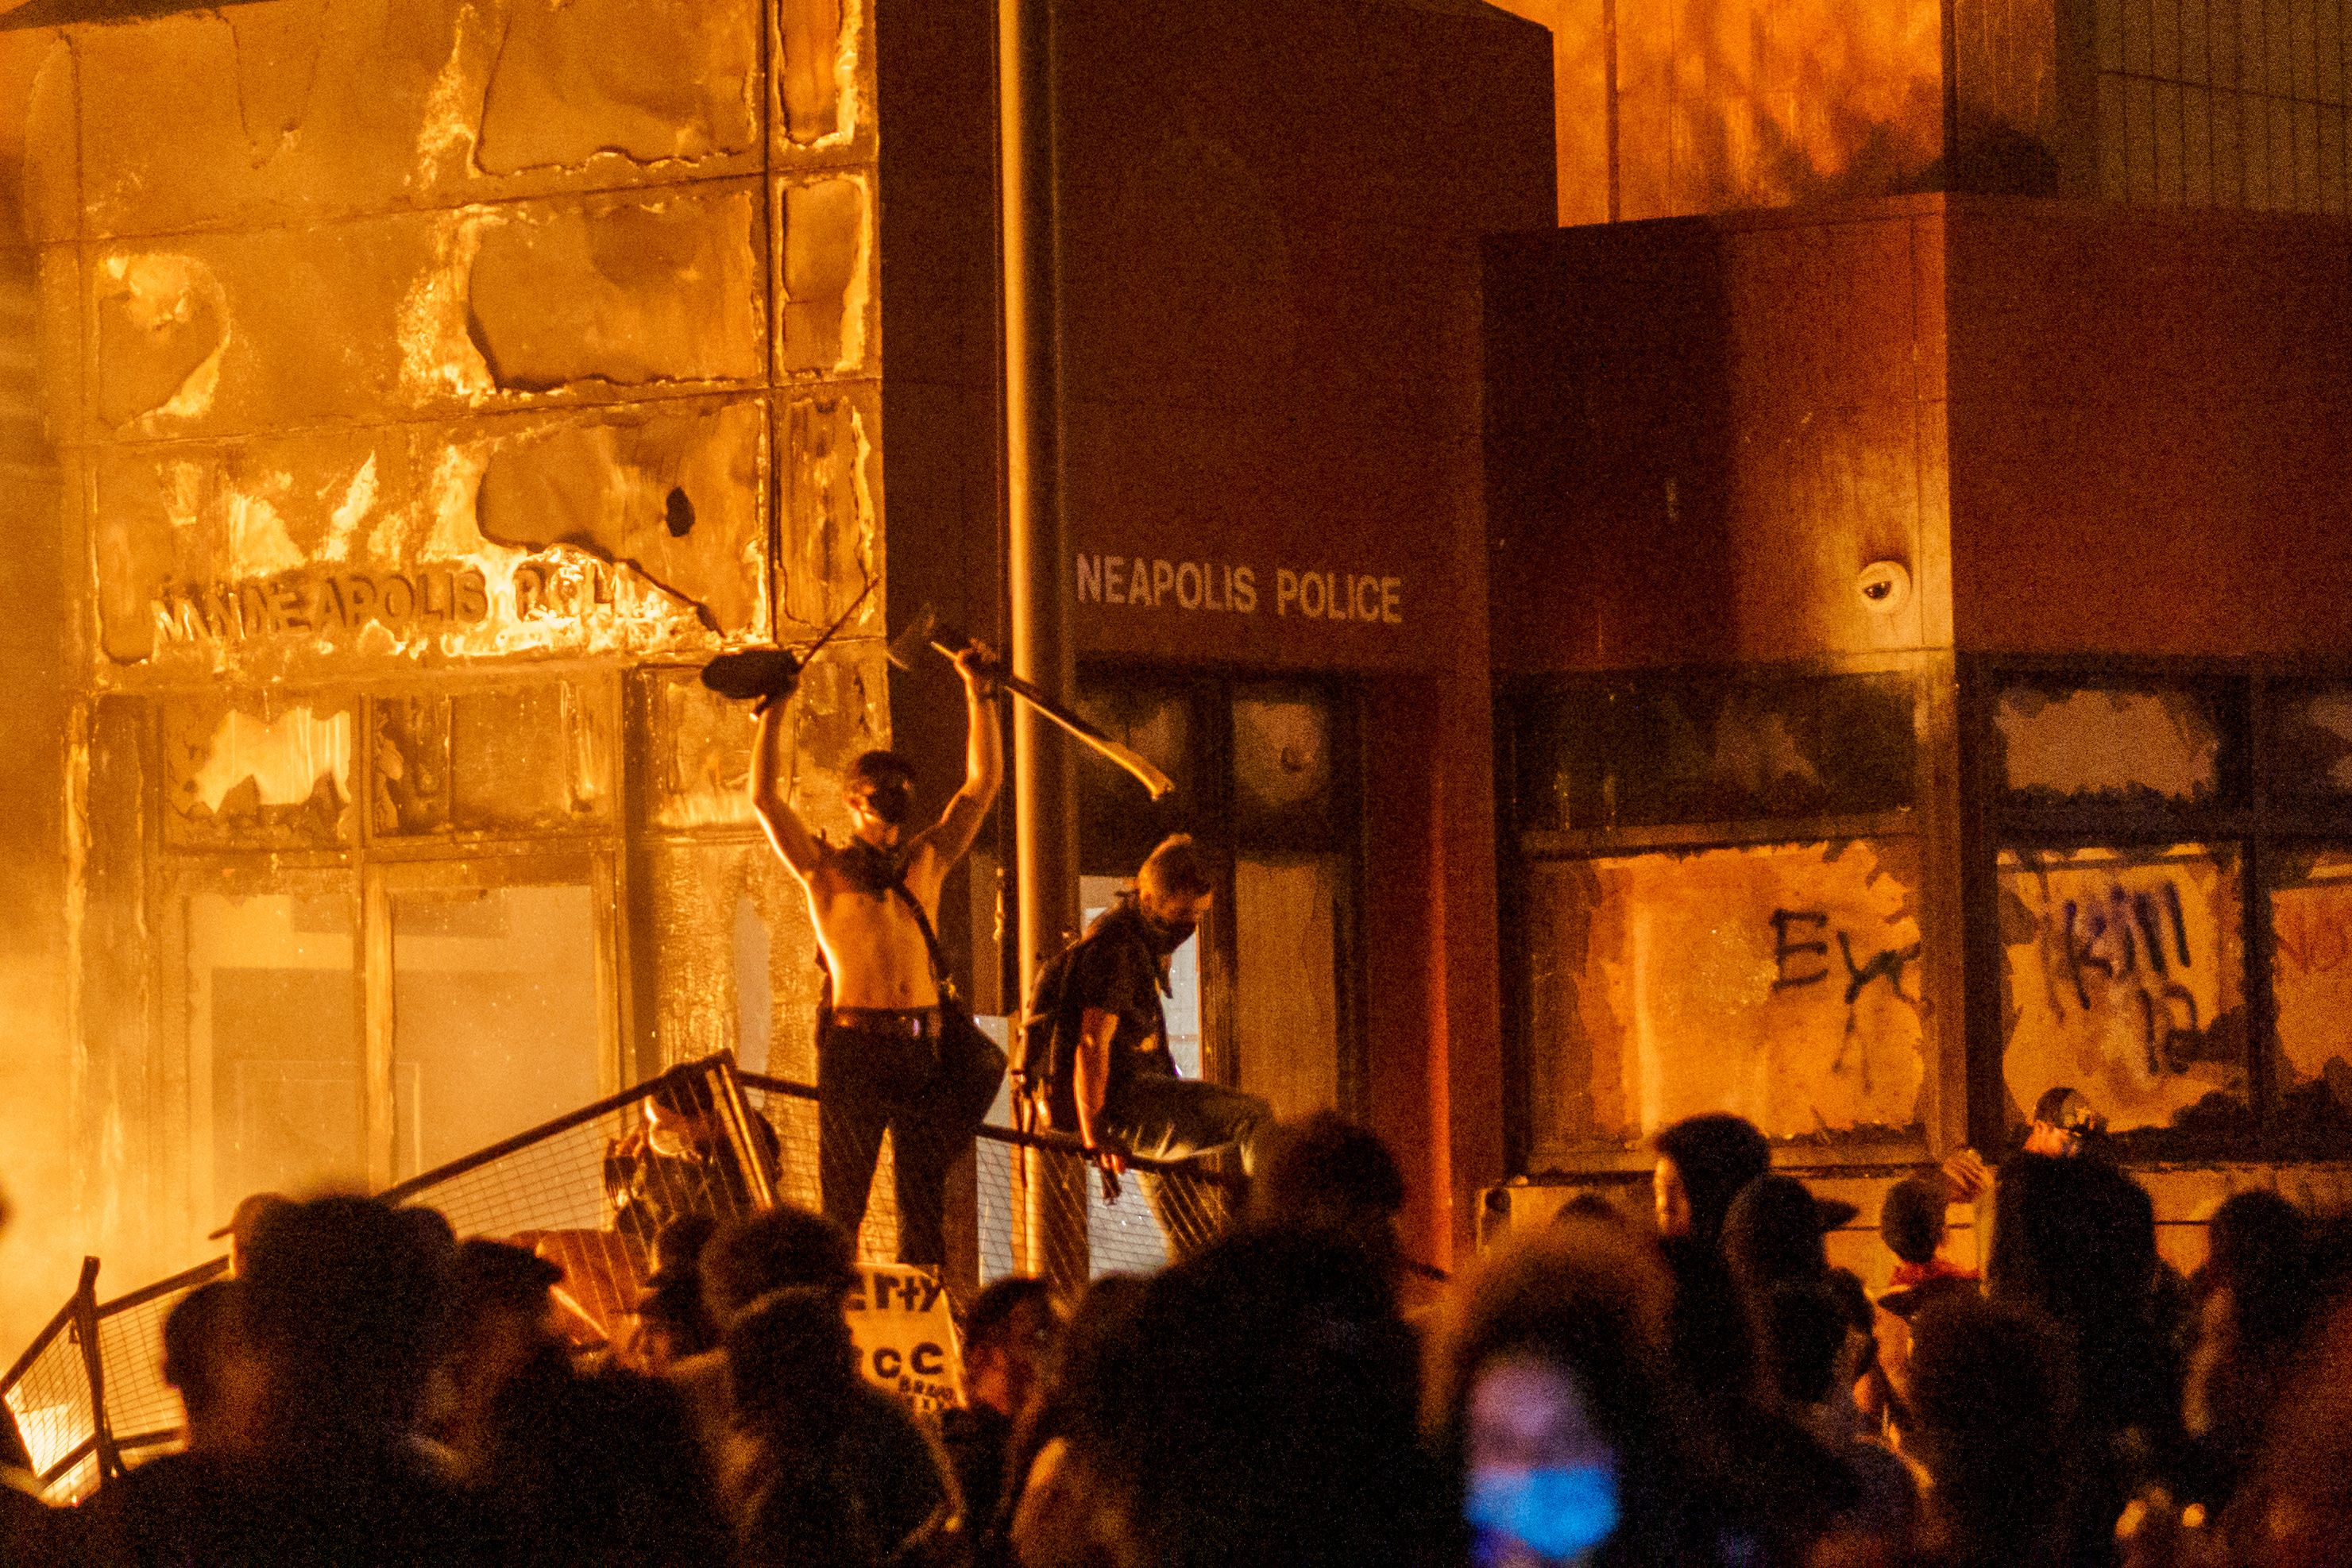 TOPSHOT - Flames from a nearby fire illuminate protesters standing on a barricade in front of the Third Police Precinct on May 28, 2020 in Minneapolis, Minnesota, during a protest over the death of George Floyd, an unarmed black man, who died after a police officer kneeled on his neck for several minutes. - A police precinct in Minnesota went up in flames late on May 28 in a third day of demonstrations as the so-called Twin Cities of Minneapolis and St. Paul seethed over the shocking police killing of a handcuffed black man. The precinct, which police had abandoned, burned after a group of protesters pushed through barriers around the building, breaking windows and chanting slogans. A much larger crowd demonstrated as the building went up in flames. (Photo by kerem yucel / AFP) (Photo by KEREM YUCEL/AFP via Getty Images)